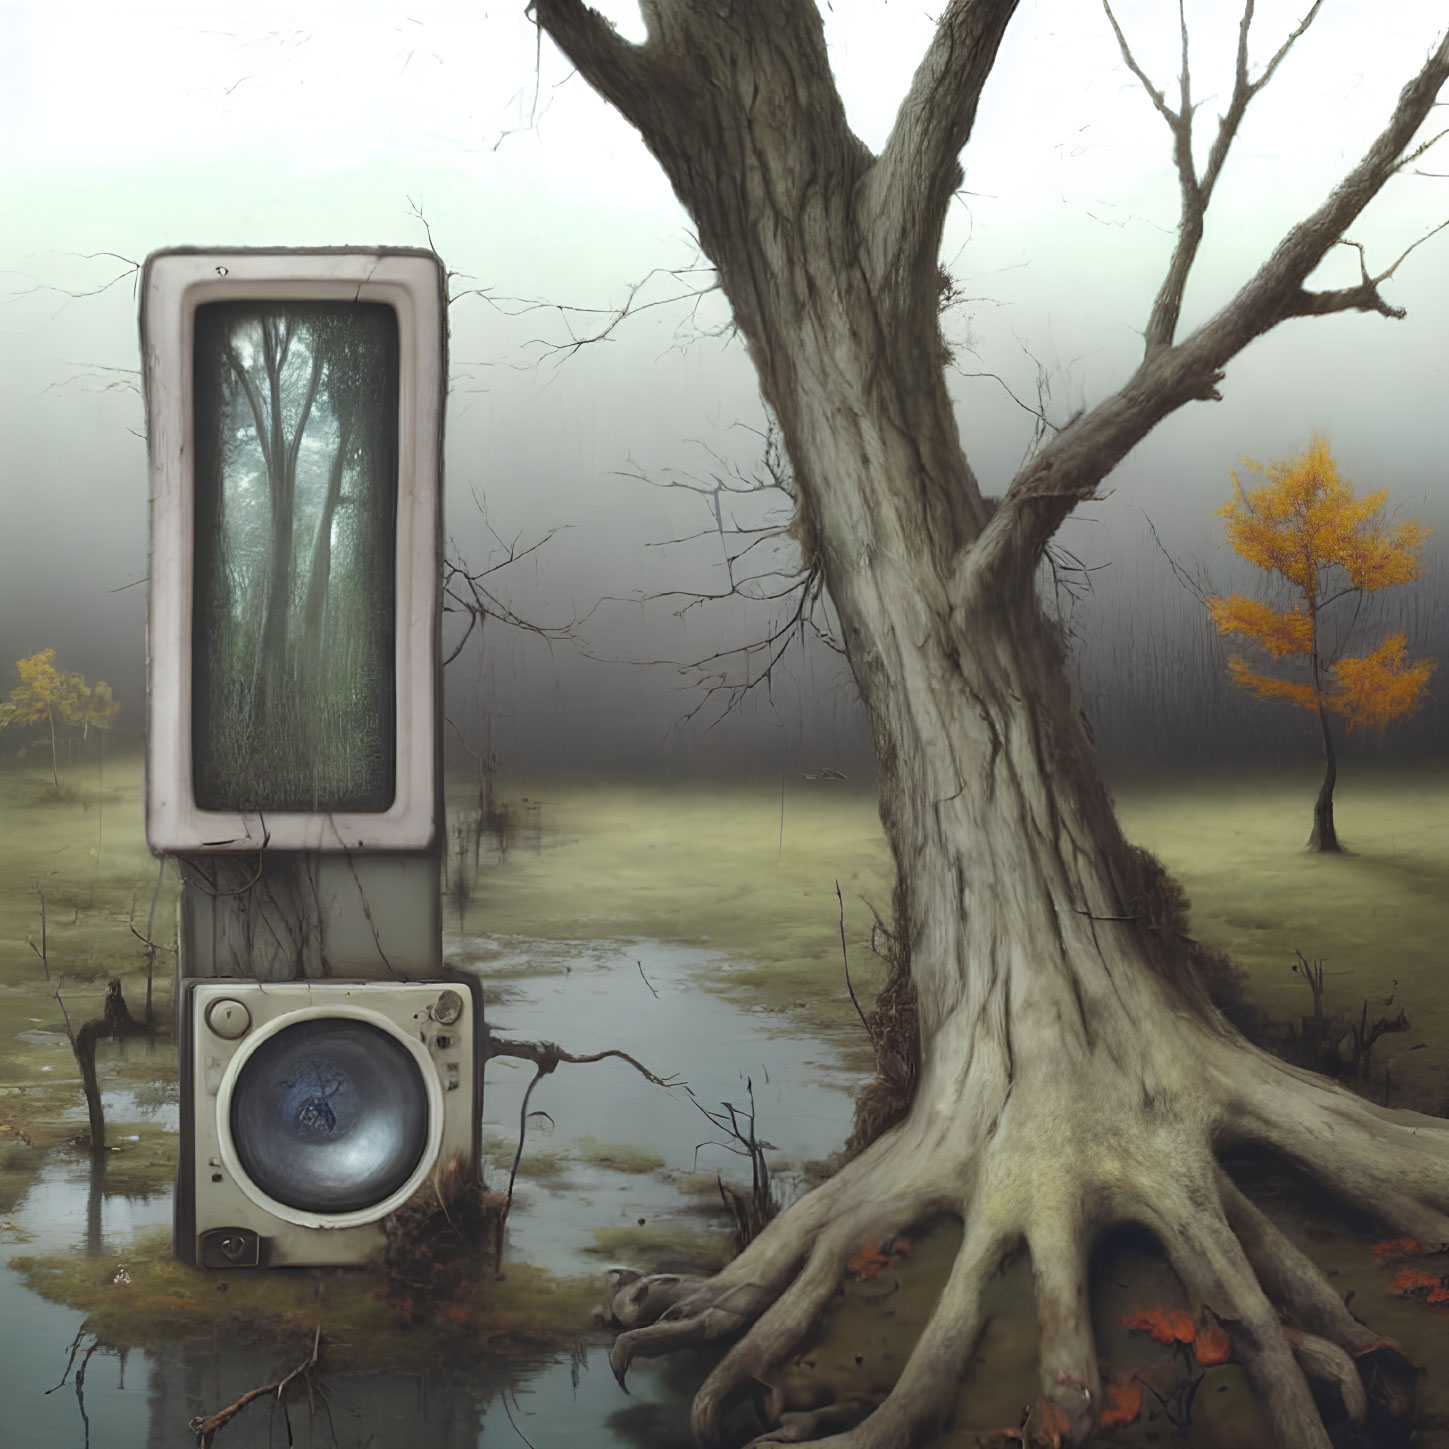 Surreal landscape with washing machine door in forest blends with misty swamp and autumn tree.